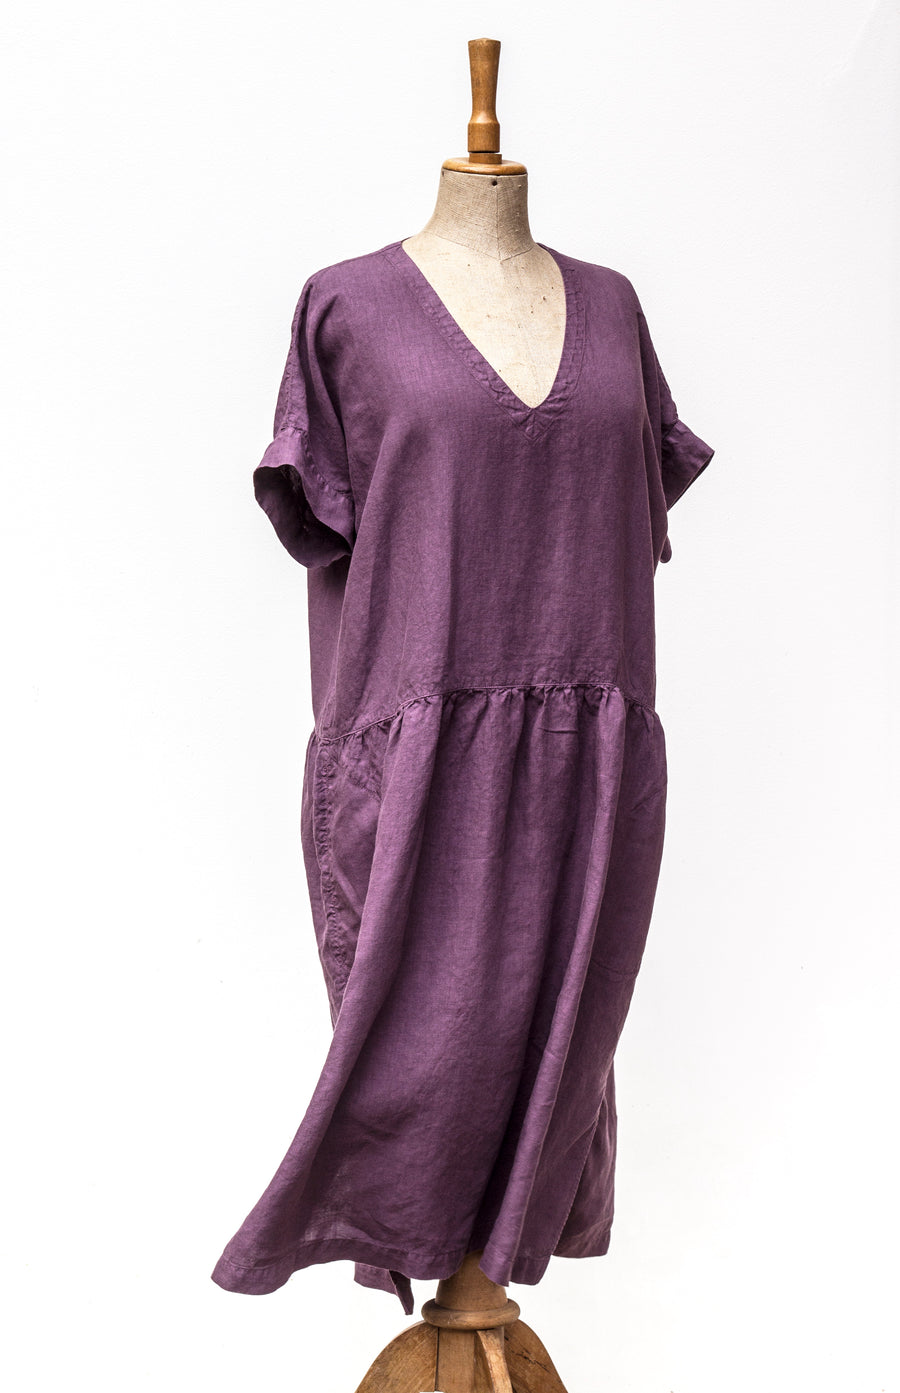 Autumn country dress in the shade of Black Plum